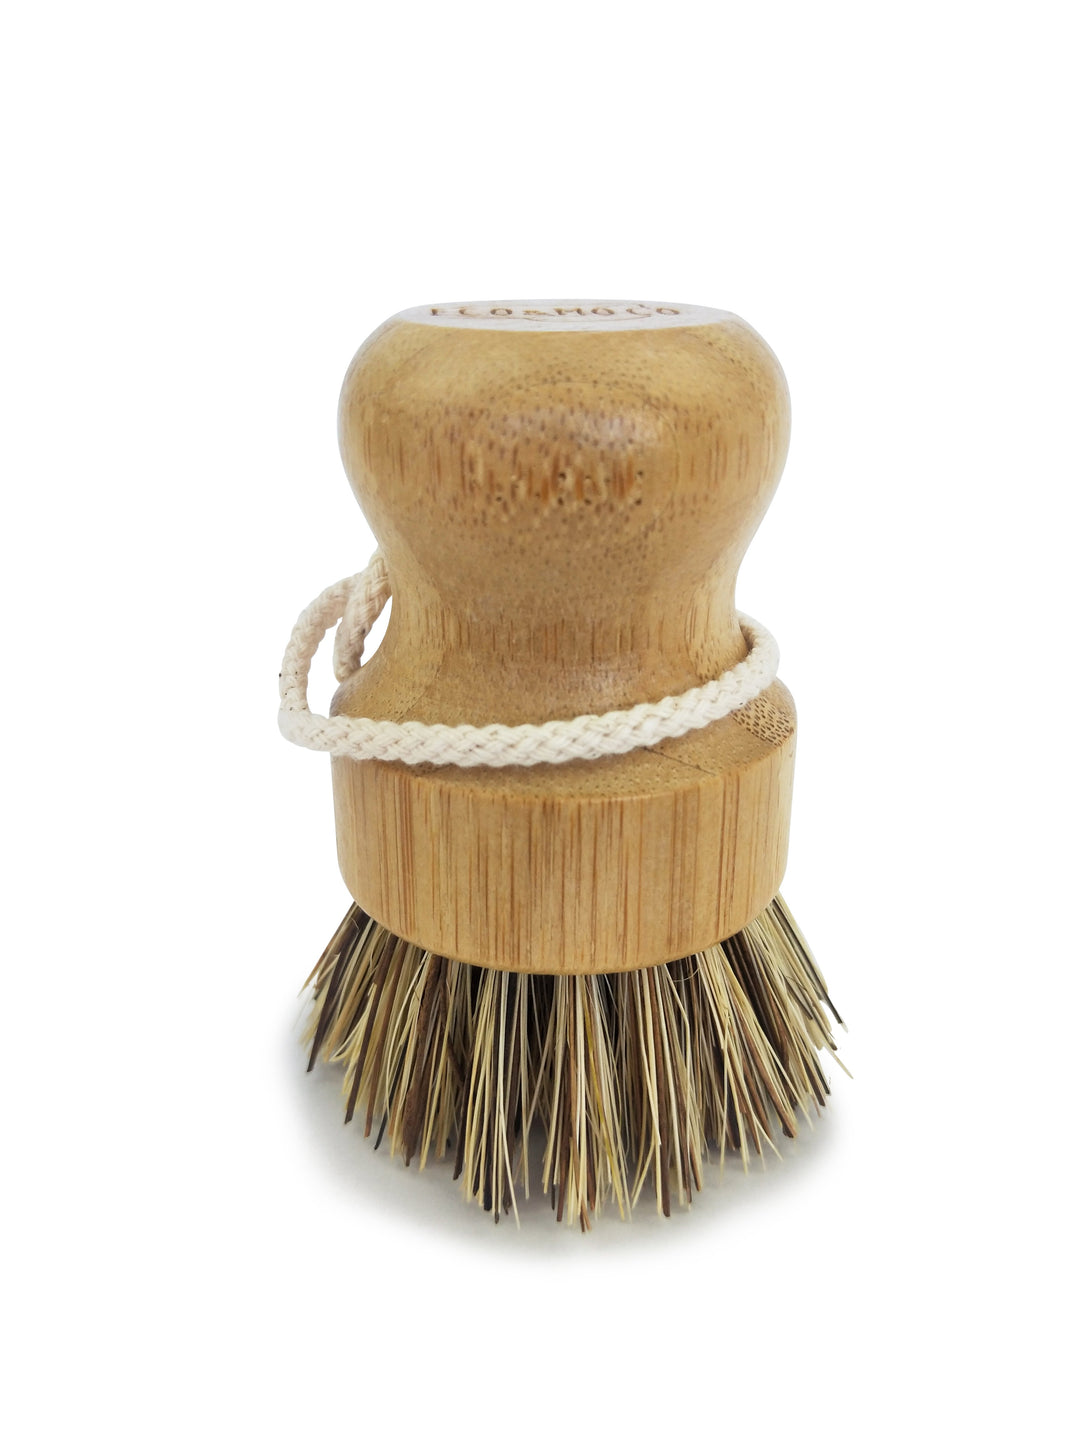 Dish Washer Pot Scrubber Brush from Eco and Moco